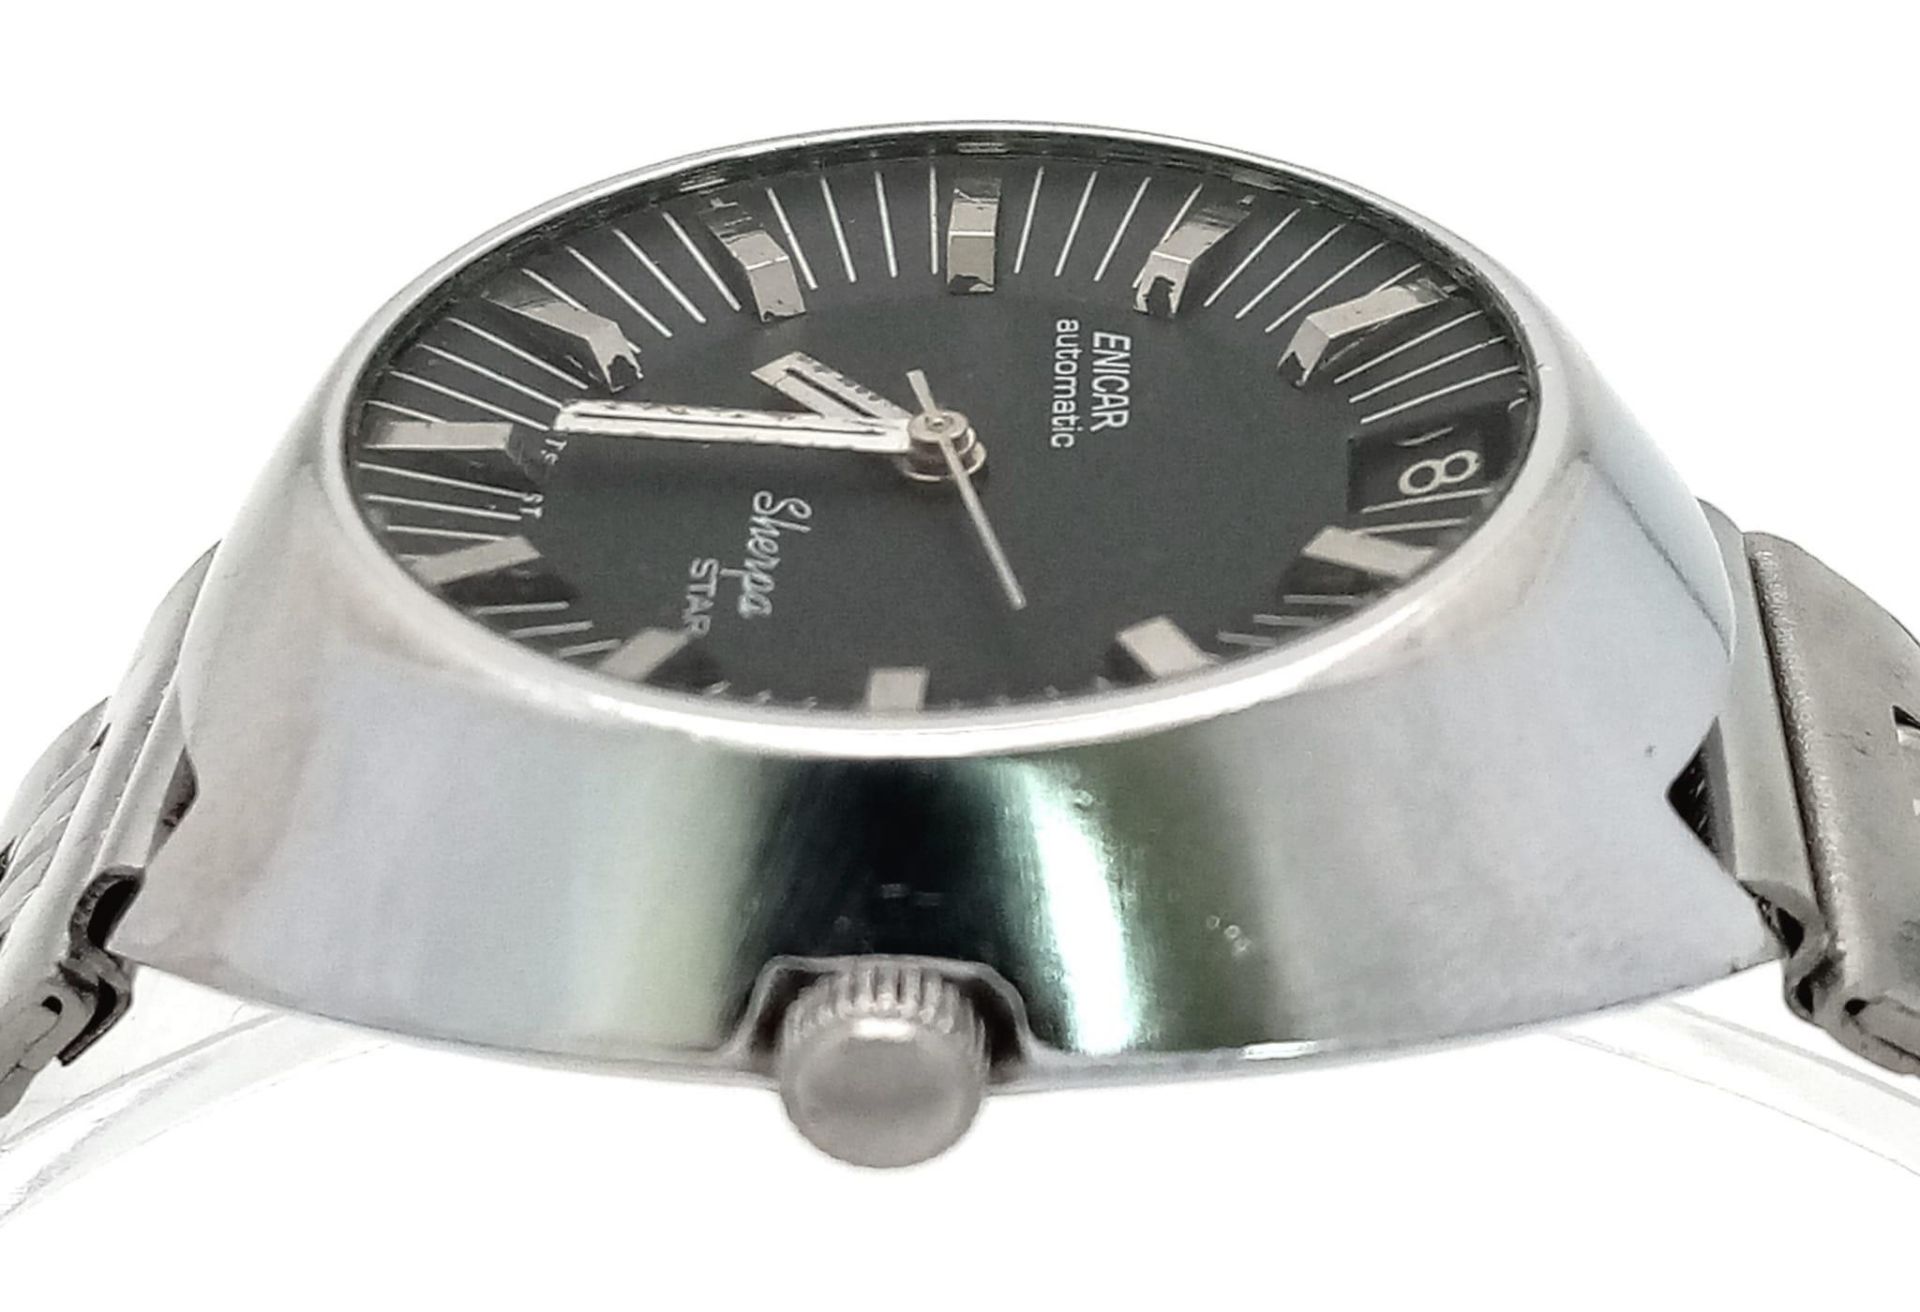 A Very Rare Enicar Sherpa Automatic Gents Watch. Stainless steel strap and case - 38mm. Black dial - Image 4 of 8